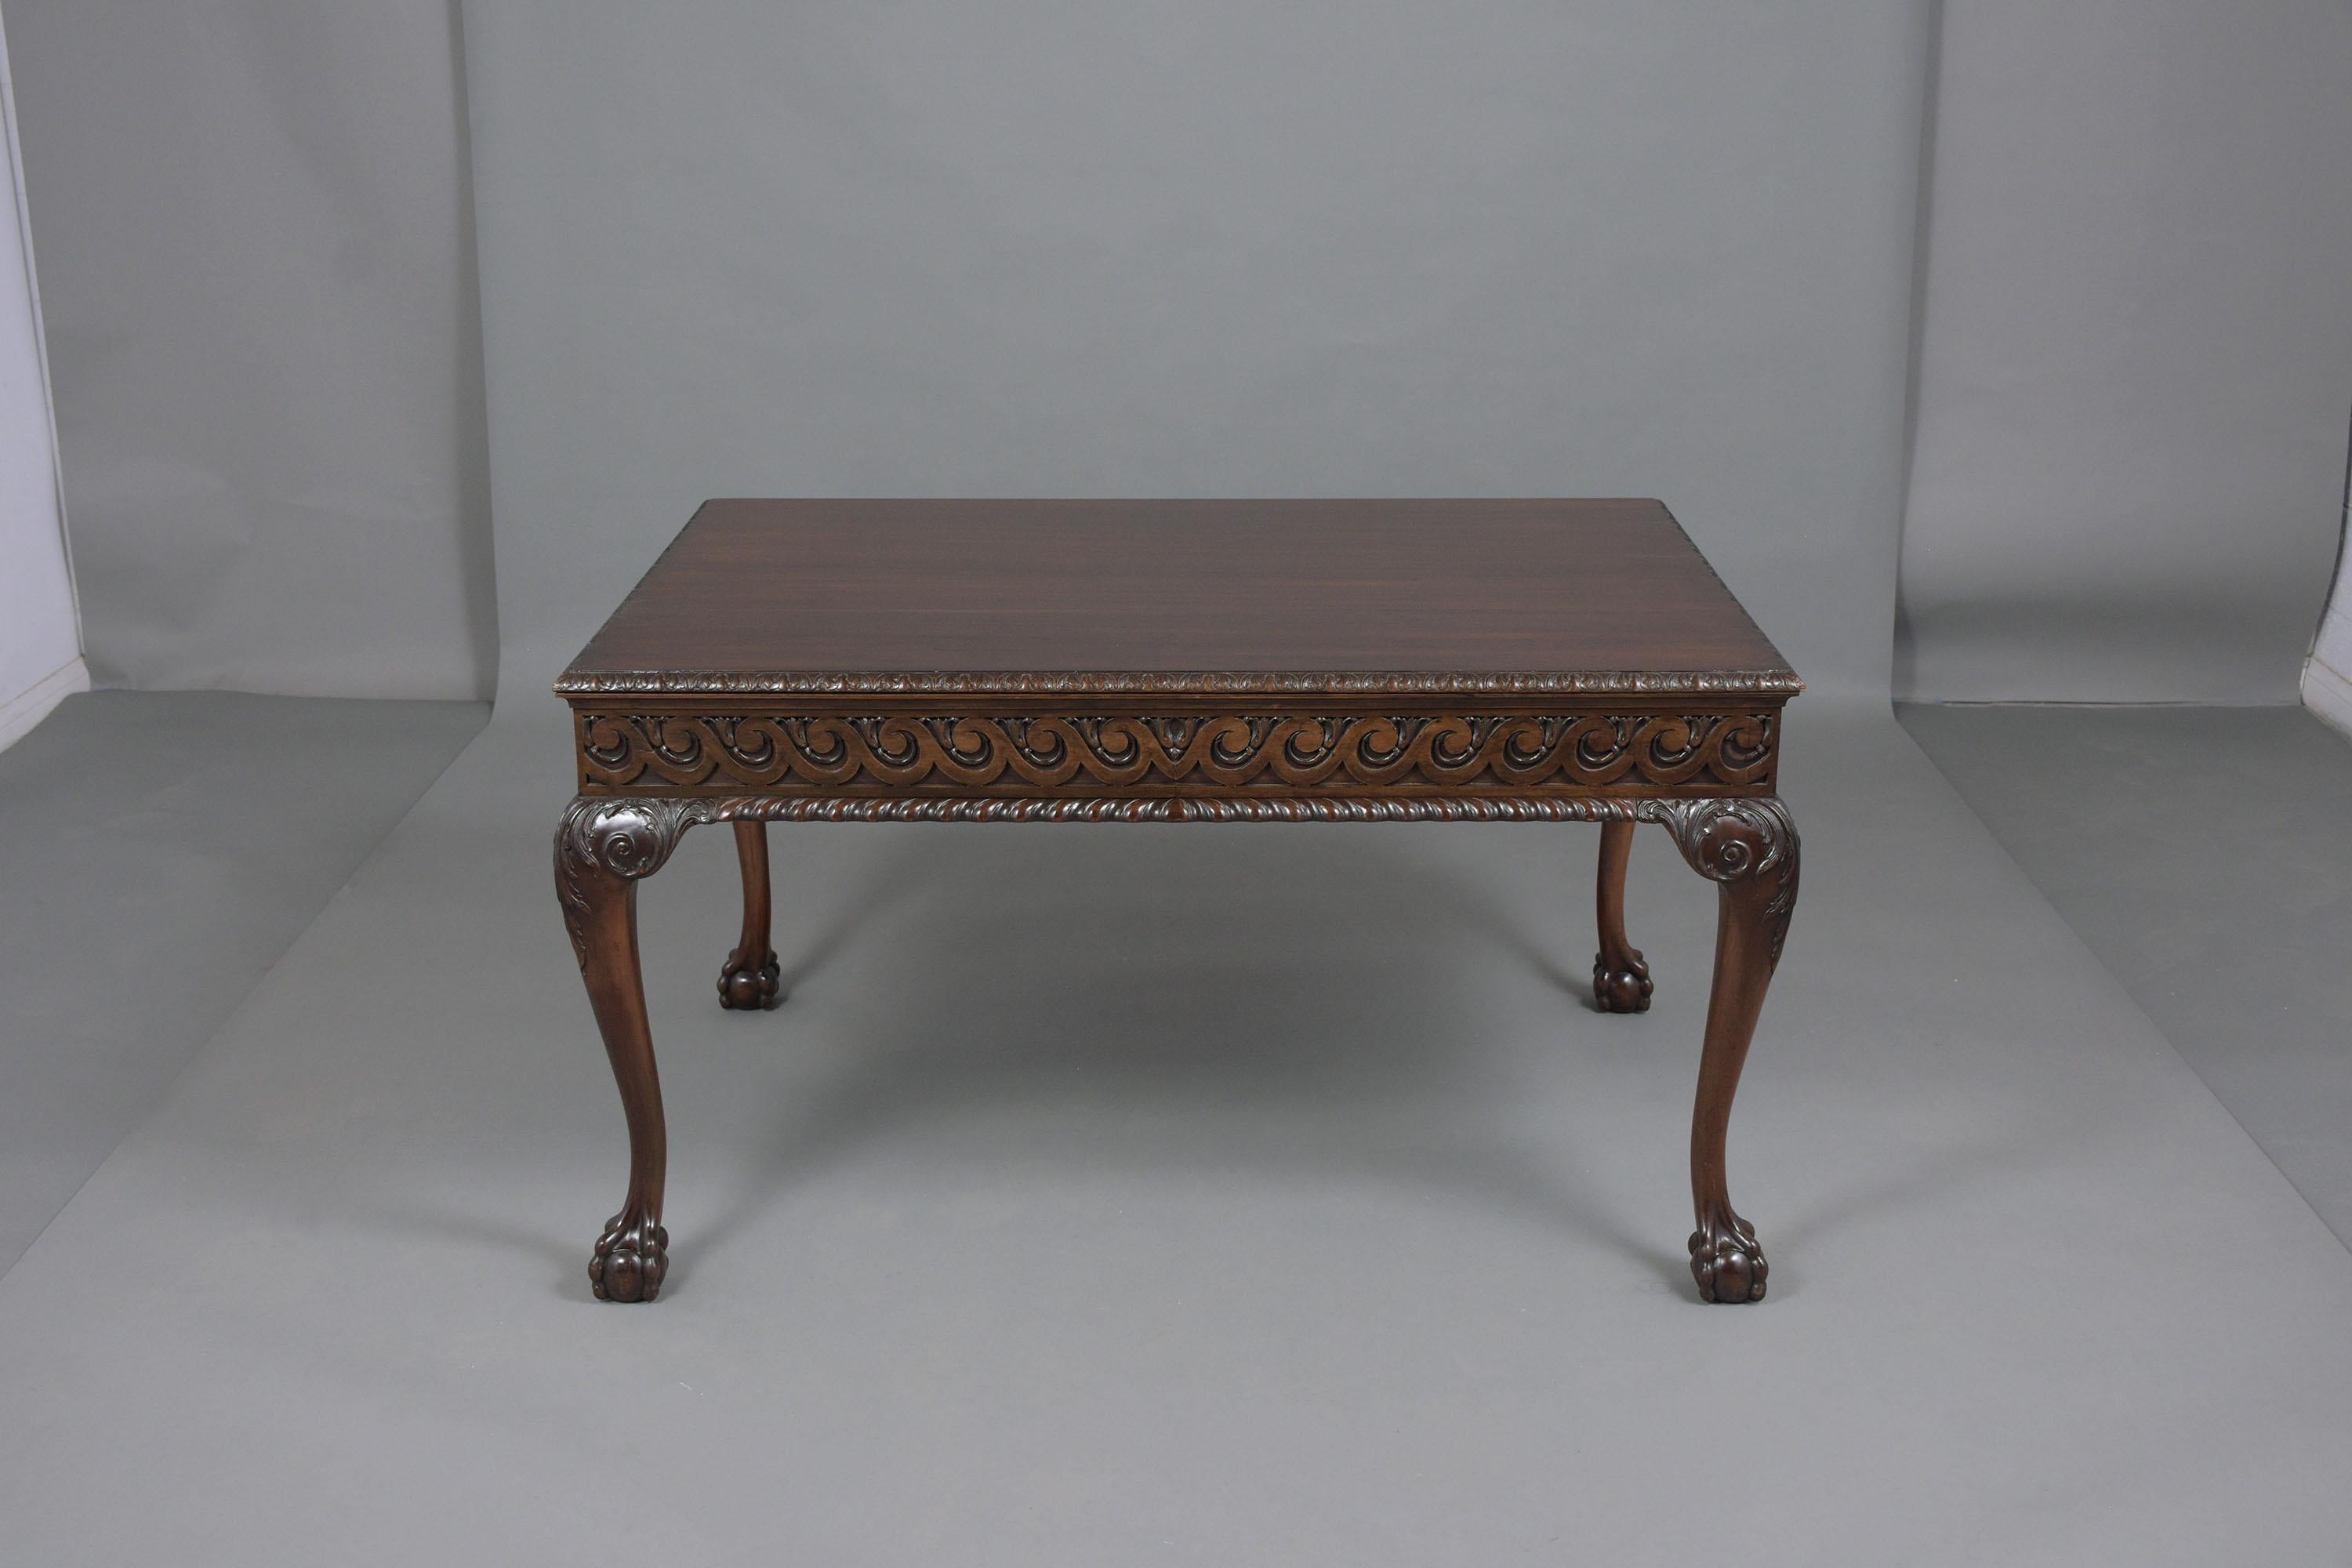 An extraordinary 1890s Chippendale desk hand-crafted out of mahogany wood in great condition with a dark walnut color stain newly waxed and polished giving it a beautiful patina finish. This writing table features a rectangular top with carved